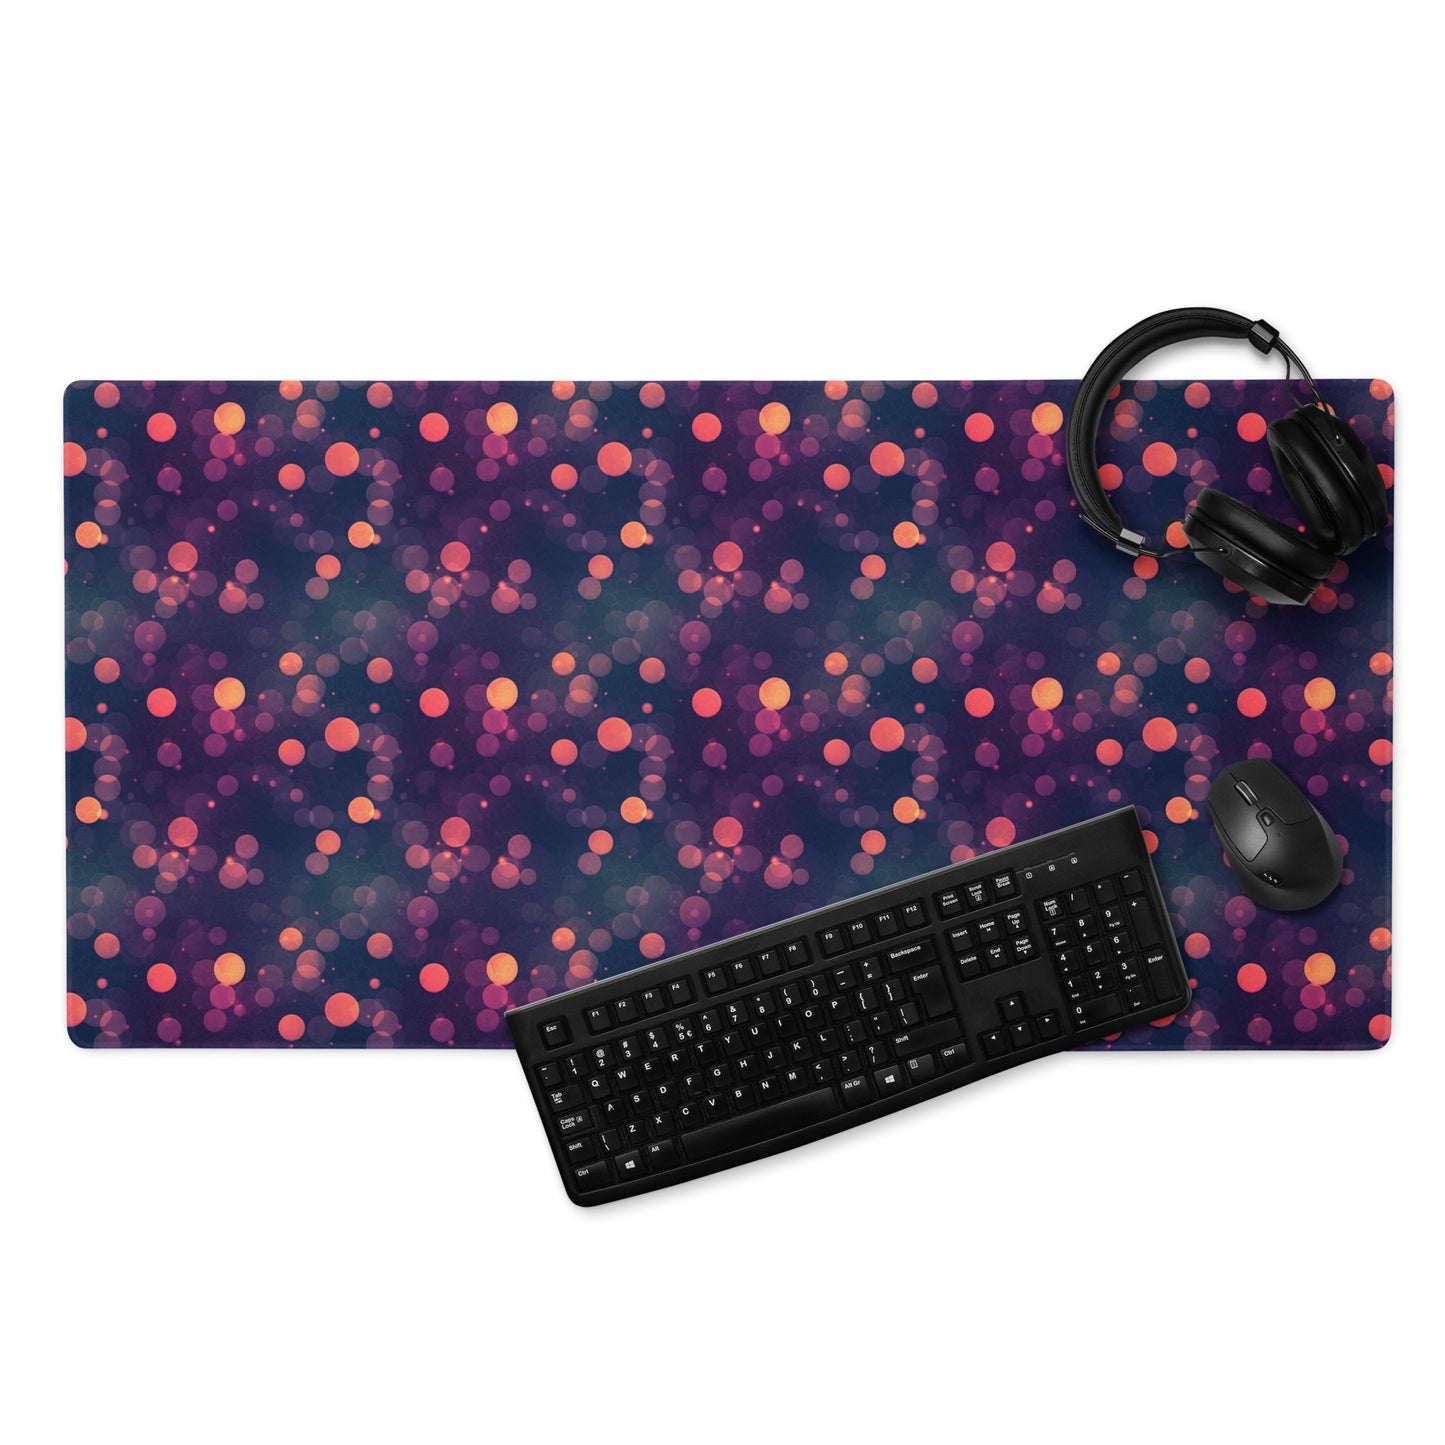 A 36" x 18" desk pad with a purple and red polka dot pattern. With a keyboard, mouse, and headphones sitting on it.